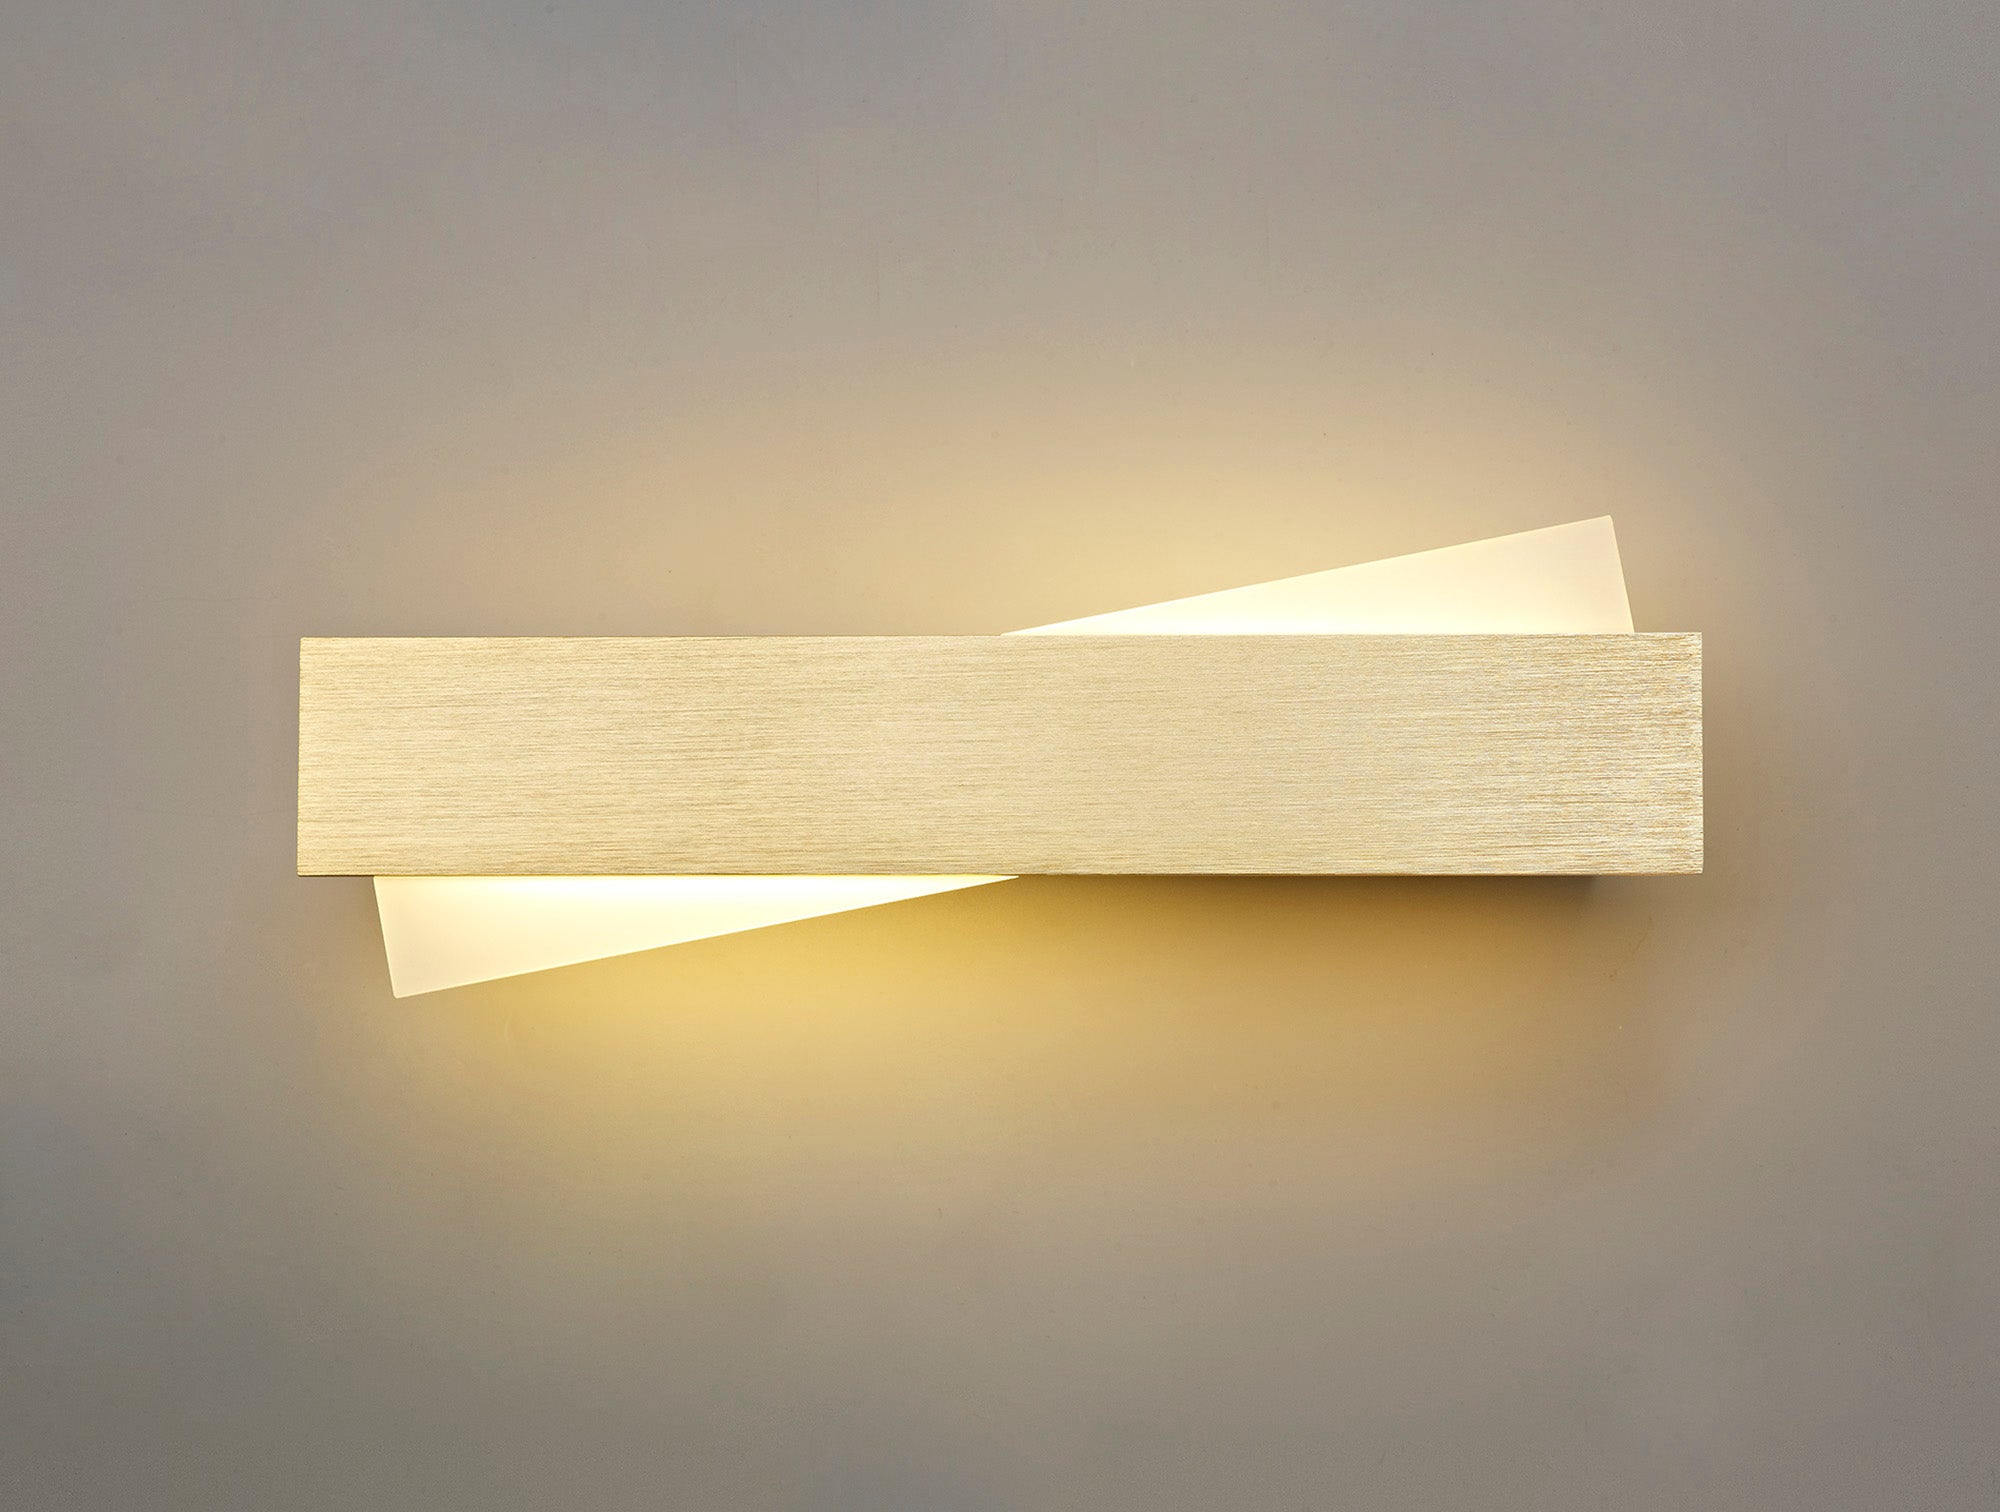 Clio Wall Lamp, 1 x 8W LED, 3000K, 640lm, Brushed Gold/Frosted White, 3yrs Warranty